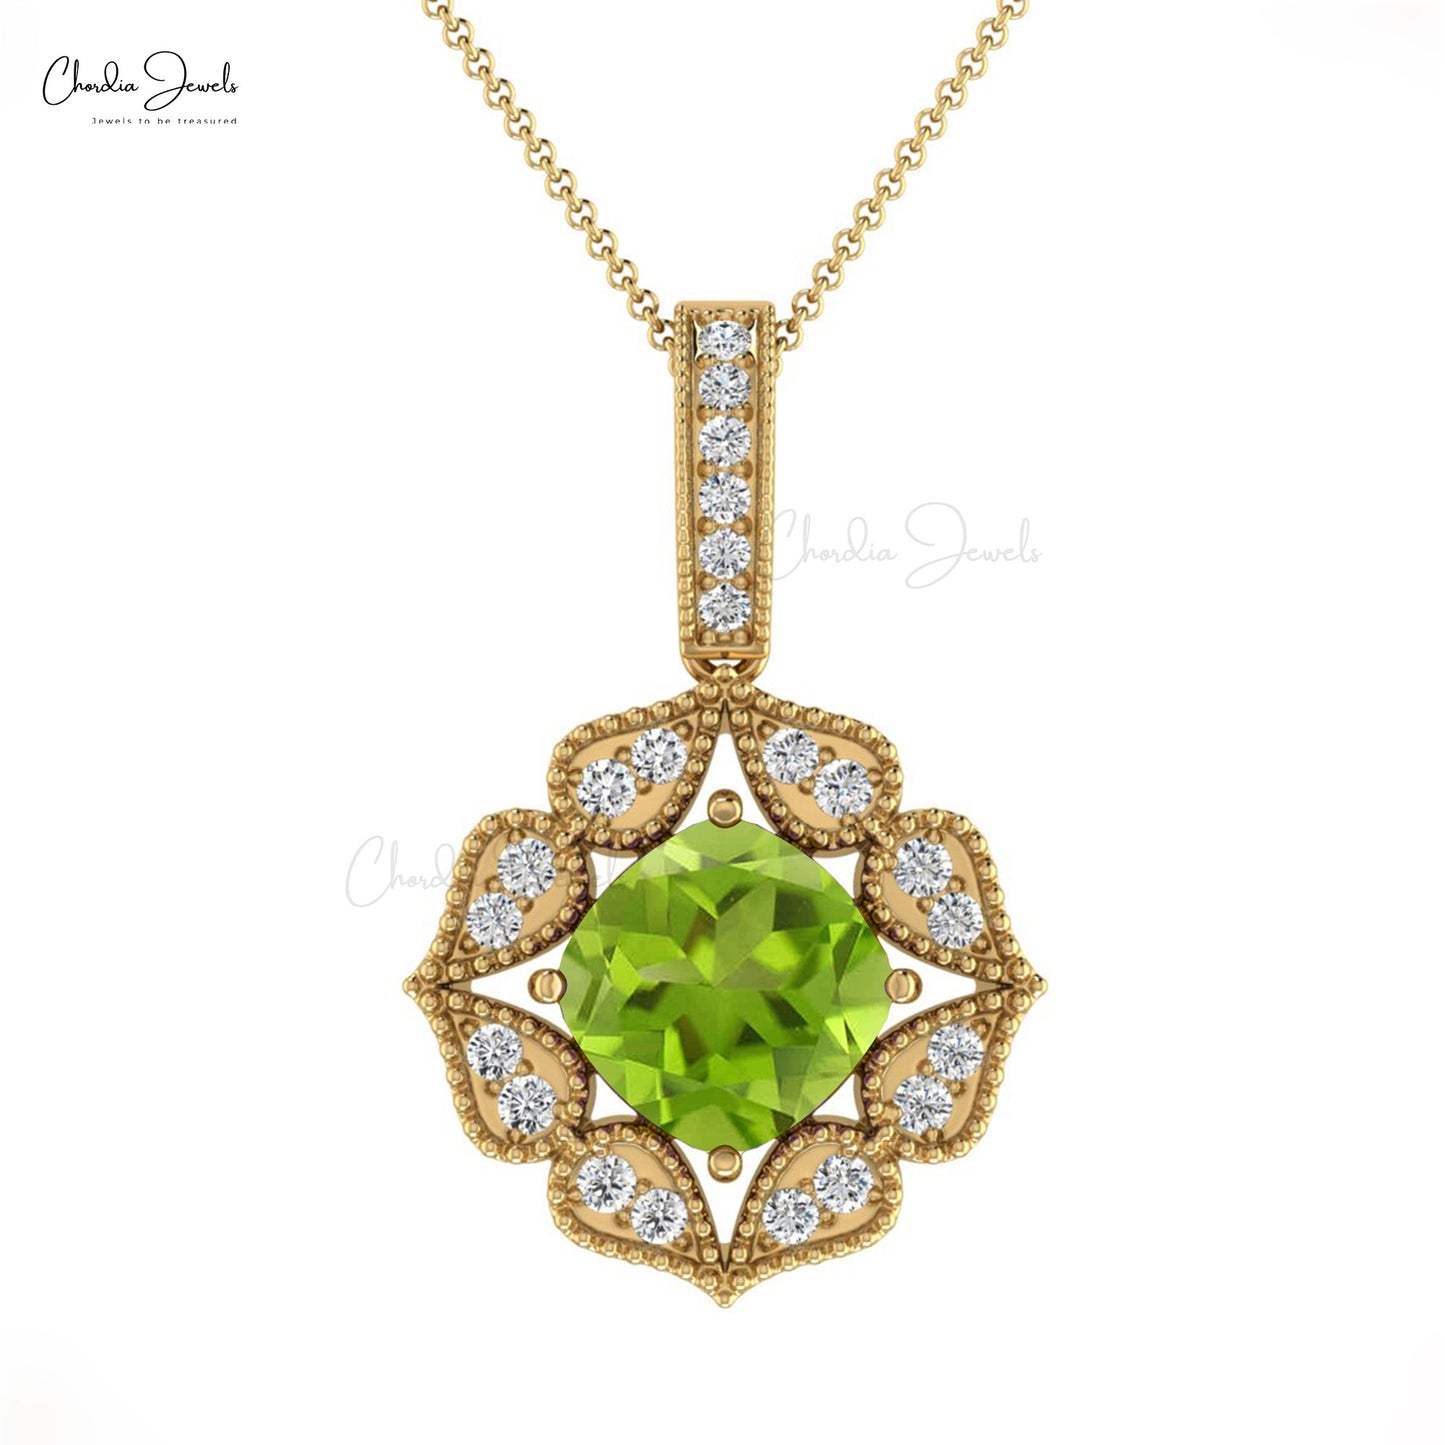 Newly Designer Natural Green Peridot Pendant Necklace Round Shape Genuine White Diamond Art Deco Pendant Necklace in 14k Pure Gold Gift For Her